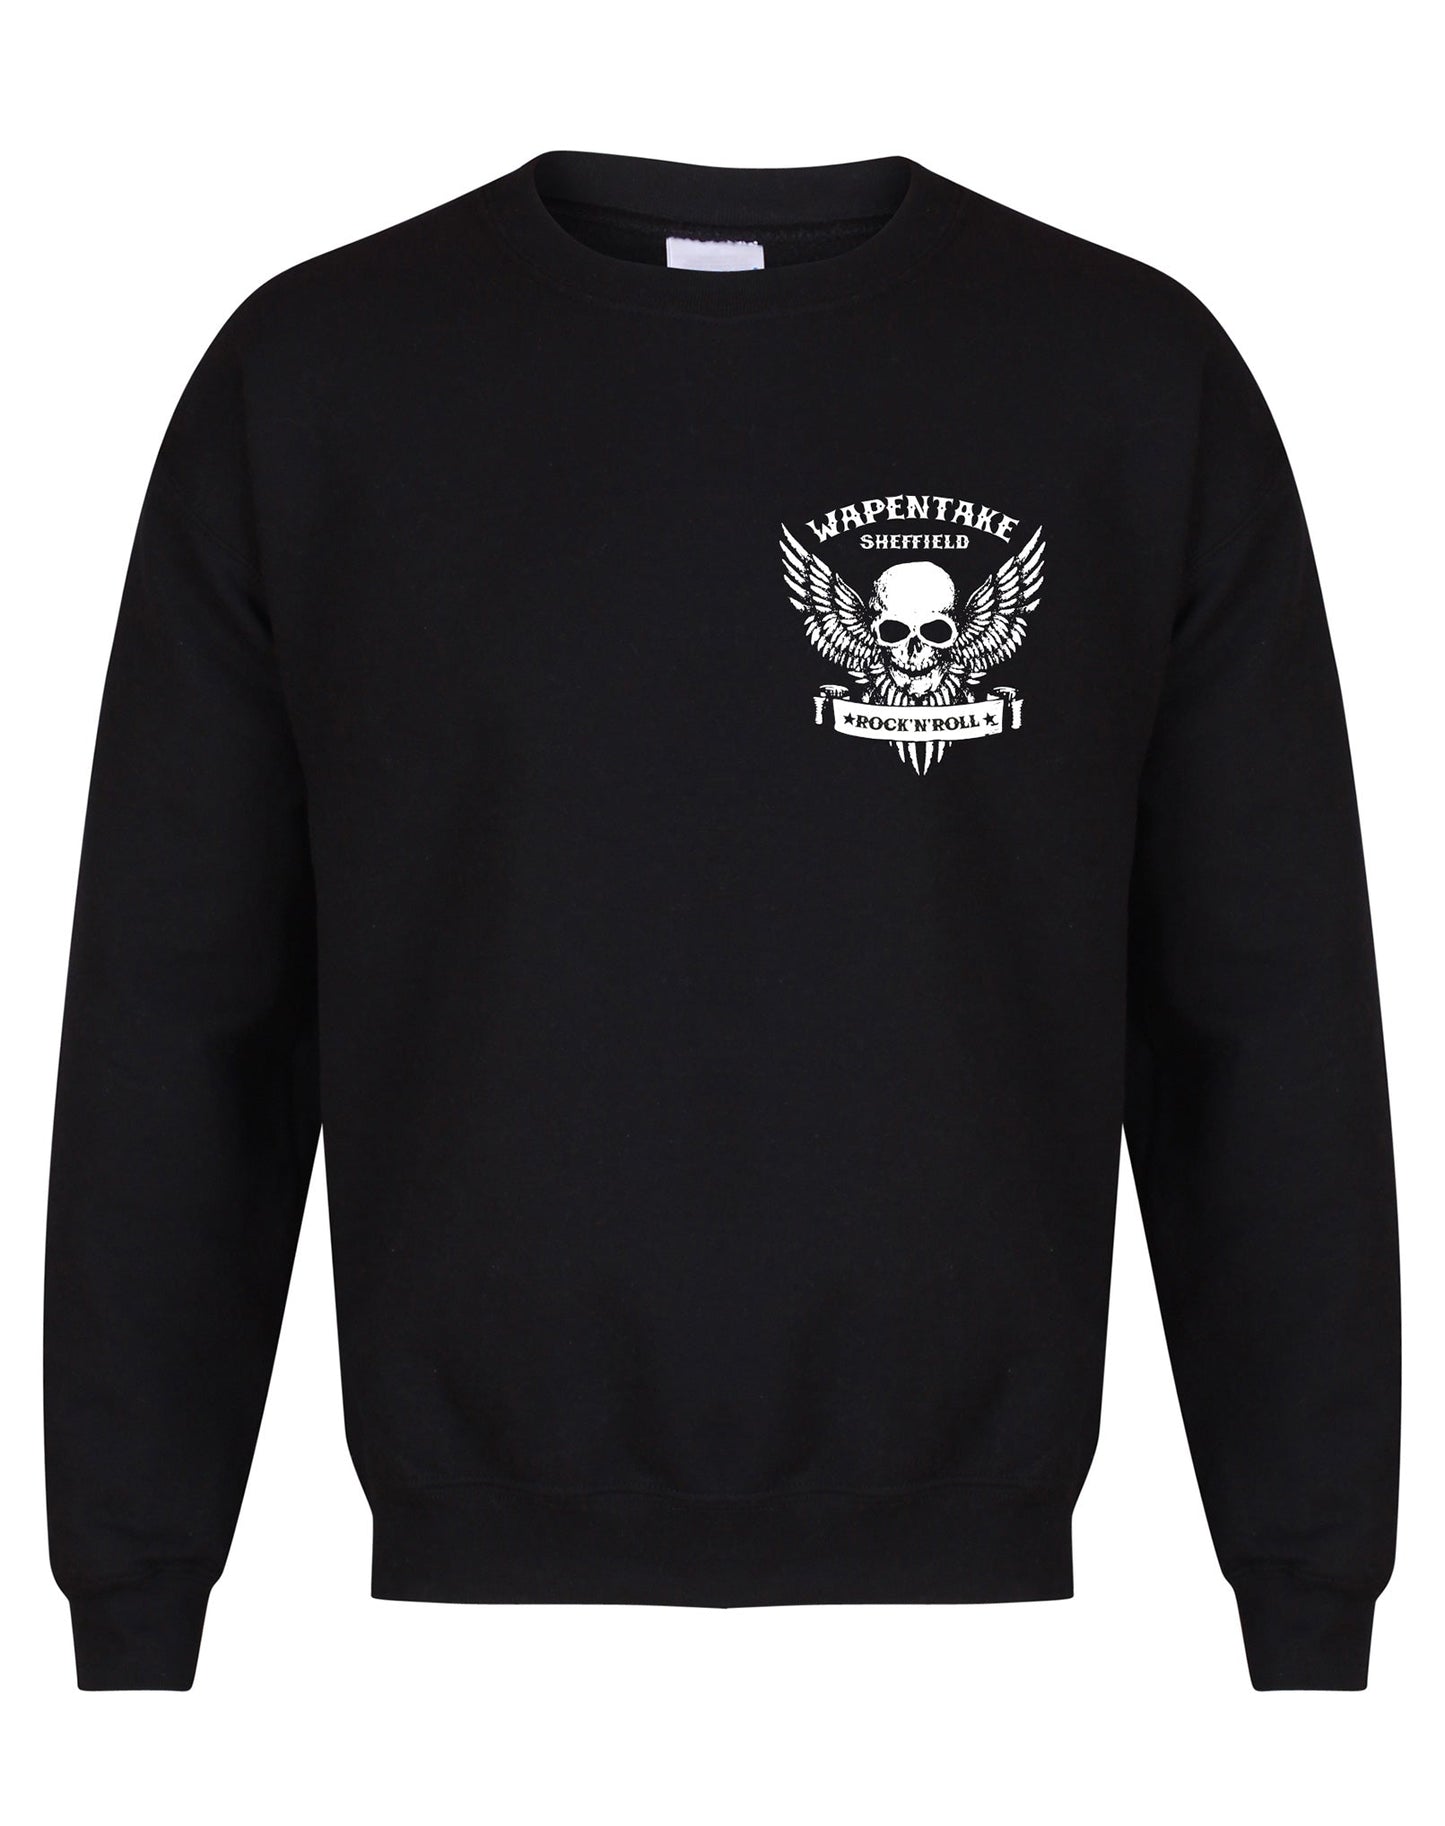 Wapentake small skull/wings unisex fit sweatshirt - various colours - Dirty Stop Outs